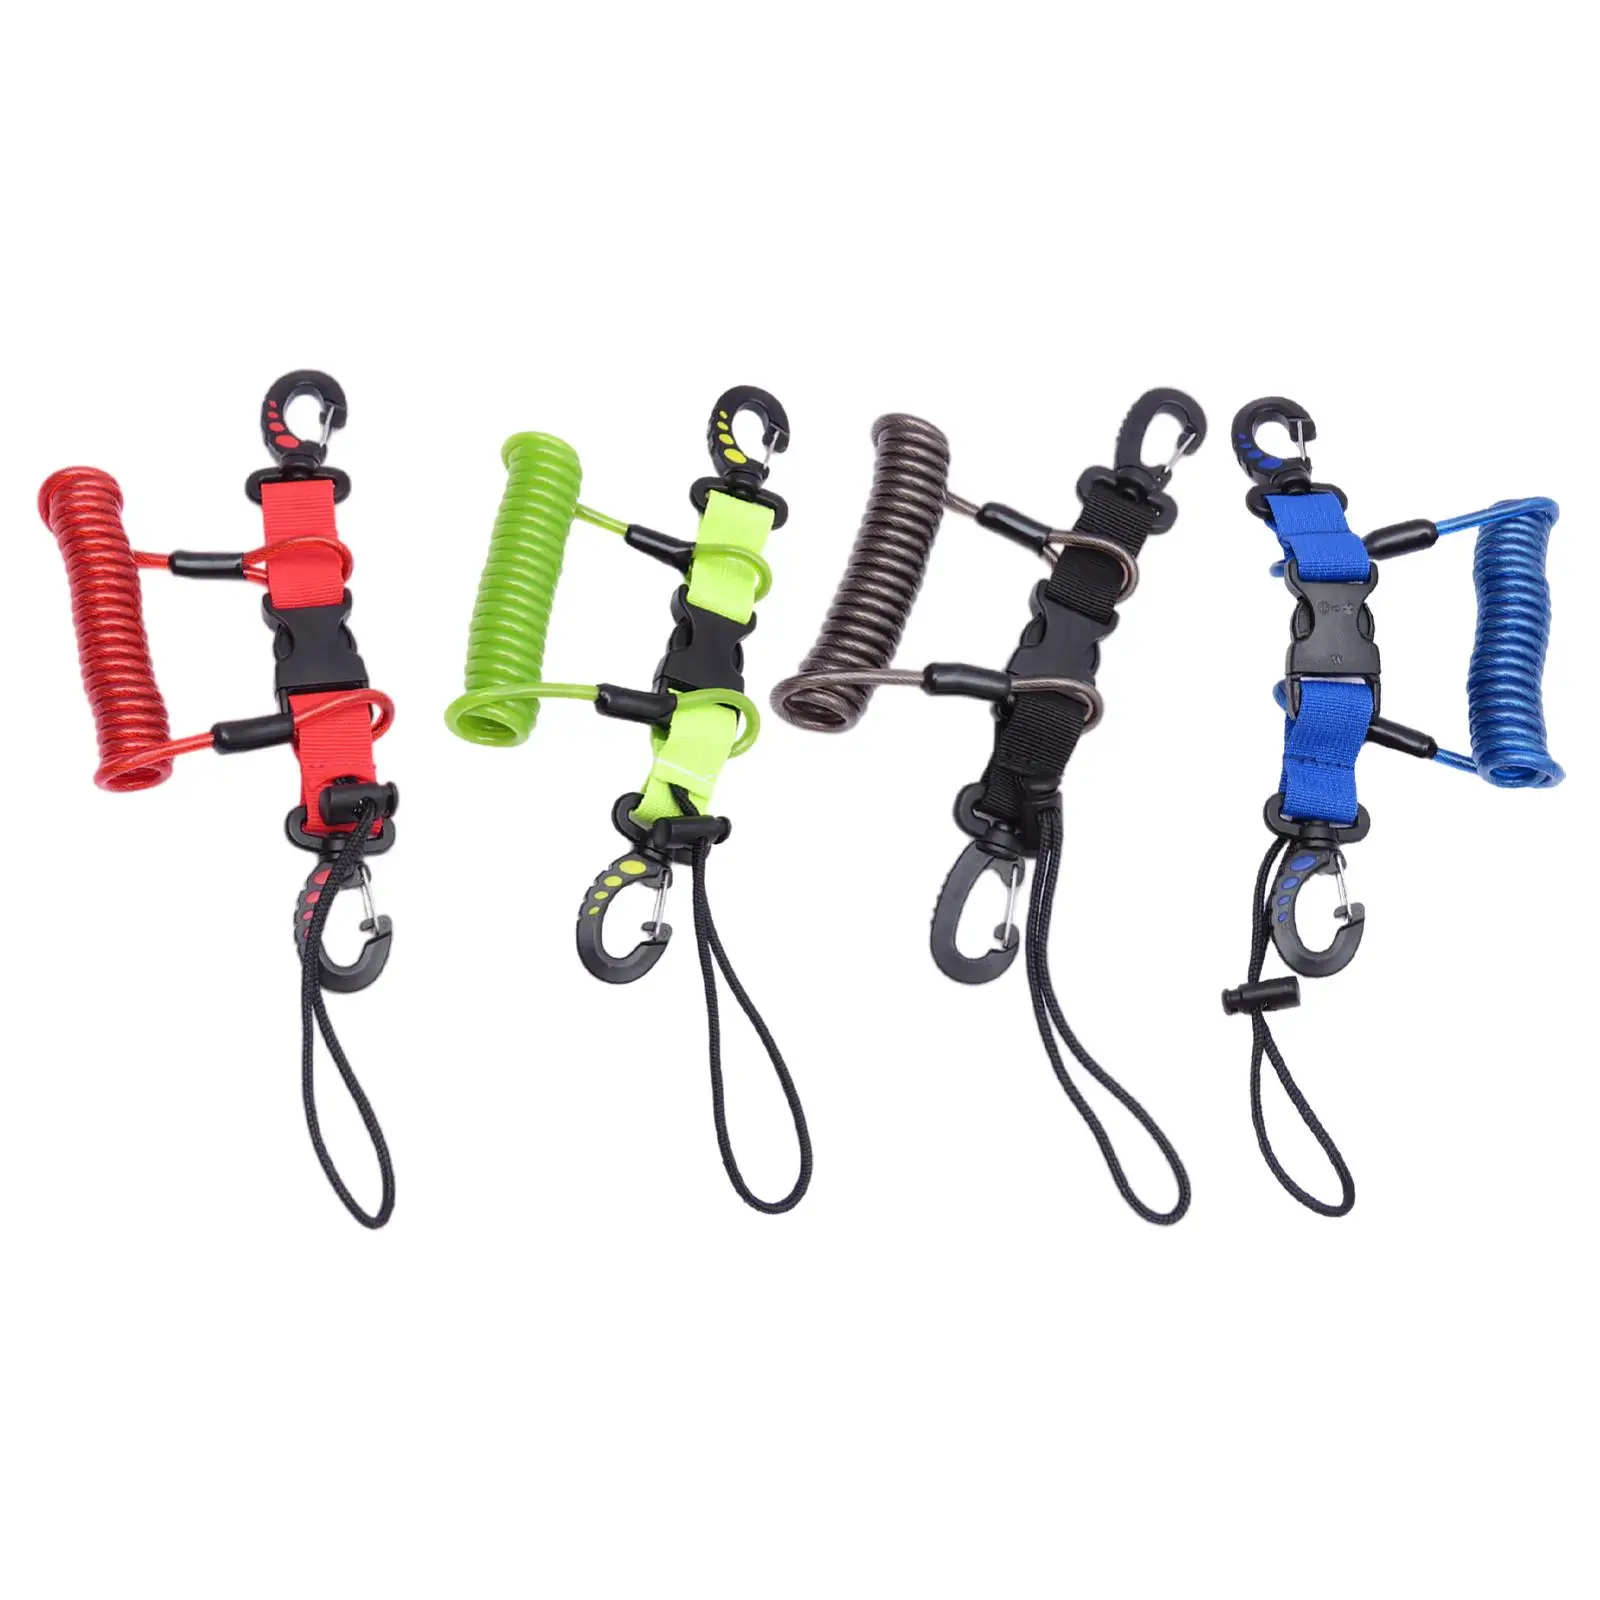 Scuba Dive Coil Camera Lanyard Webbing Strap for Diving Tools Underwater